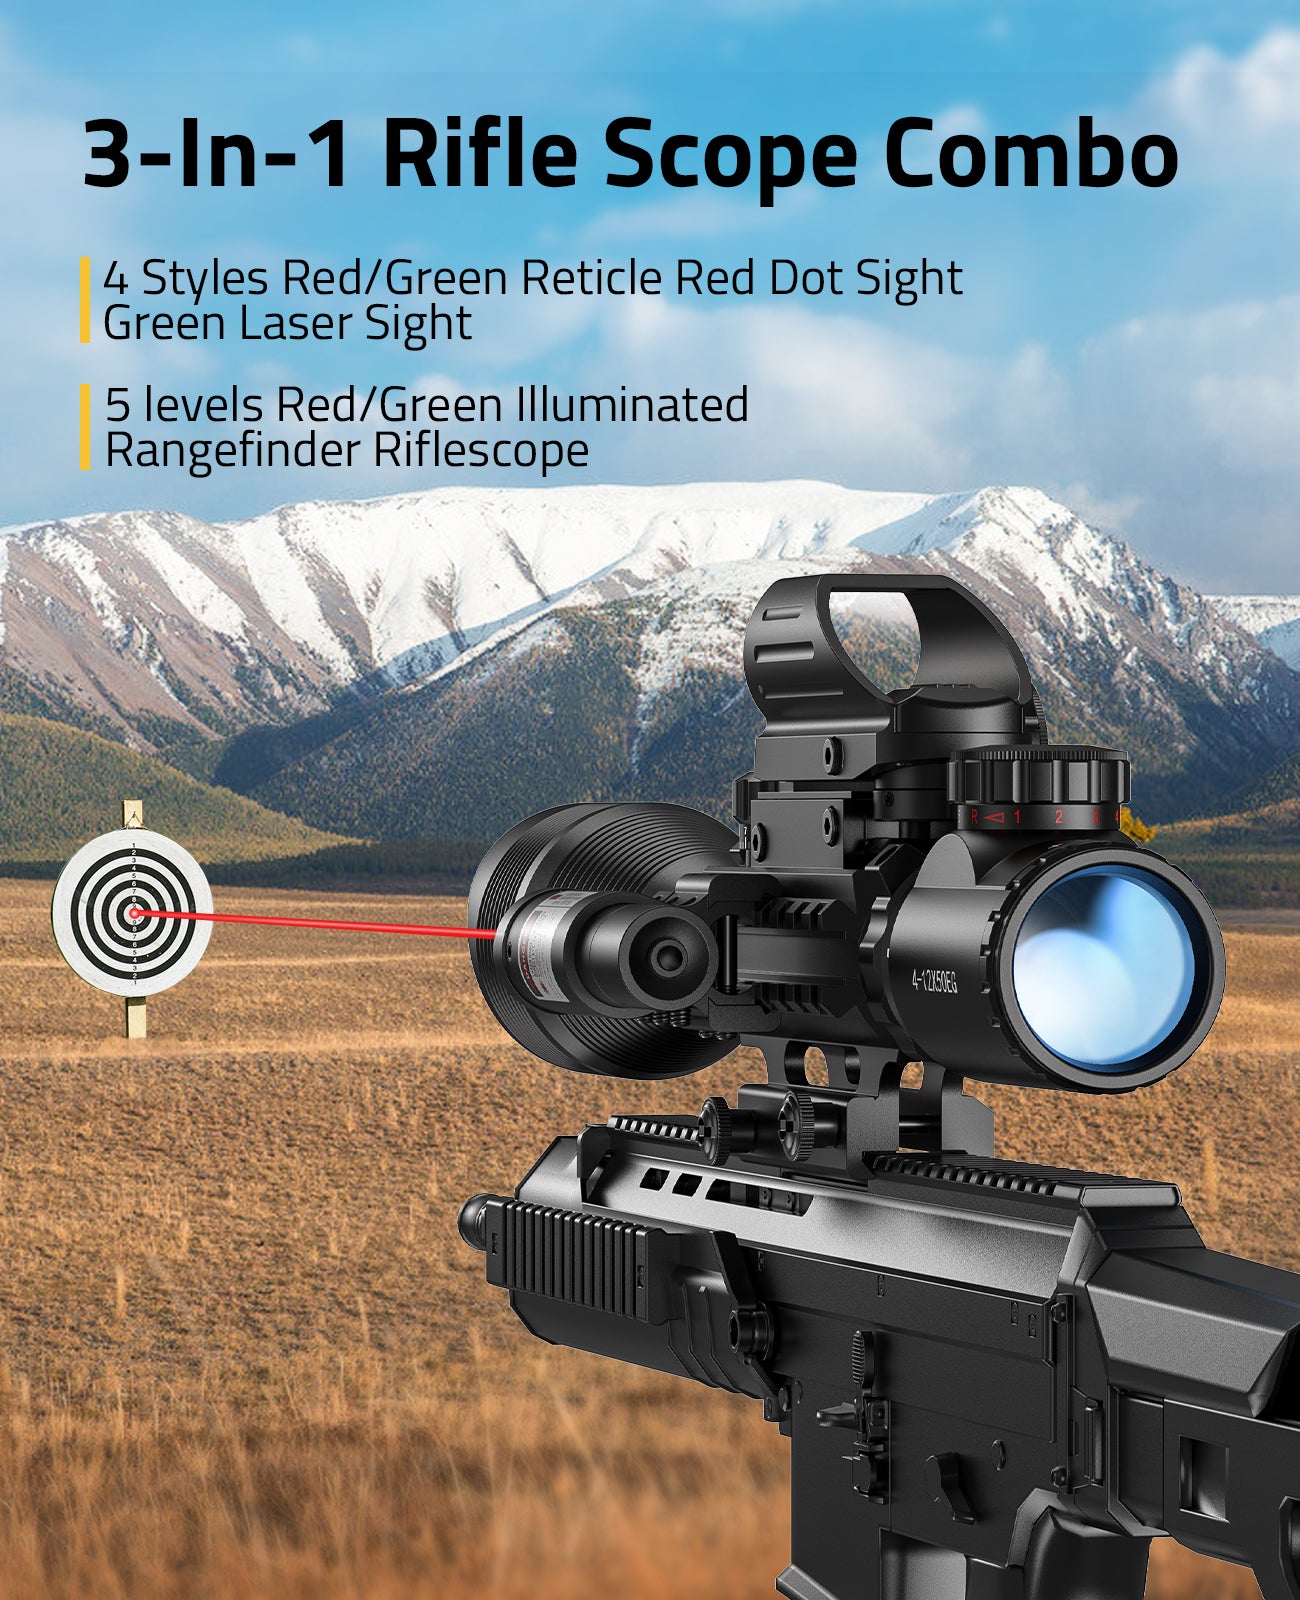 3-in-1 Rifle Scope Combo